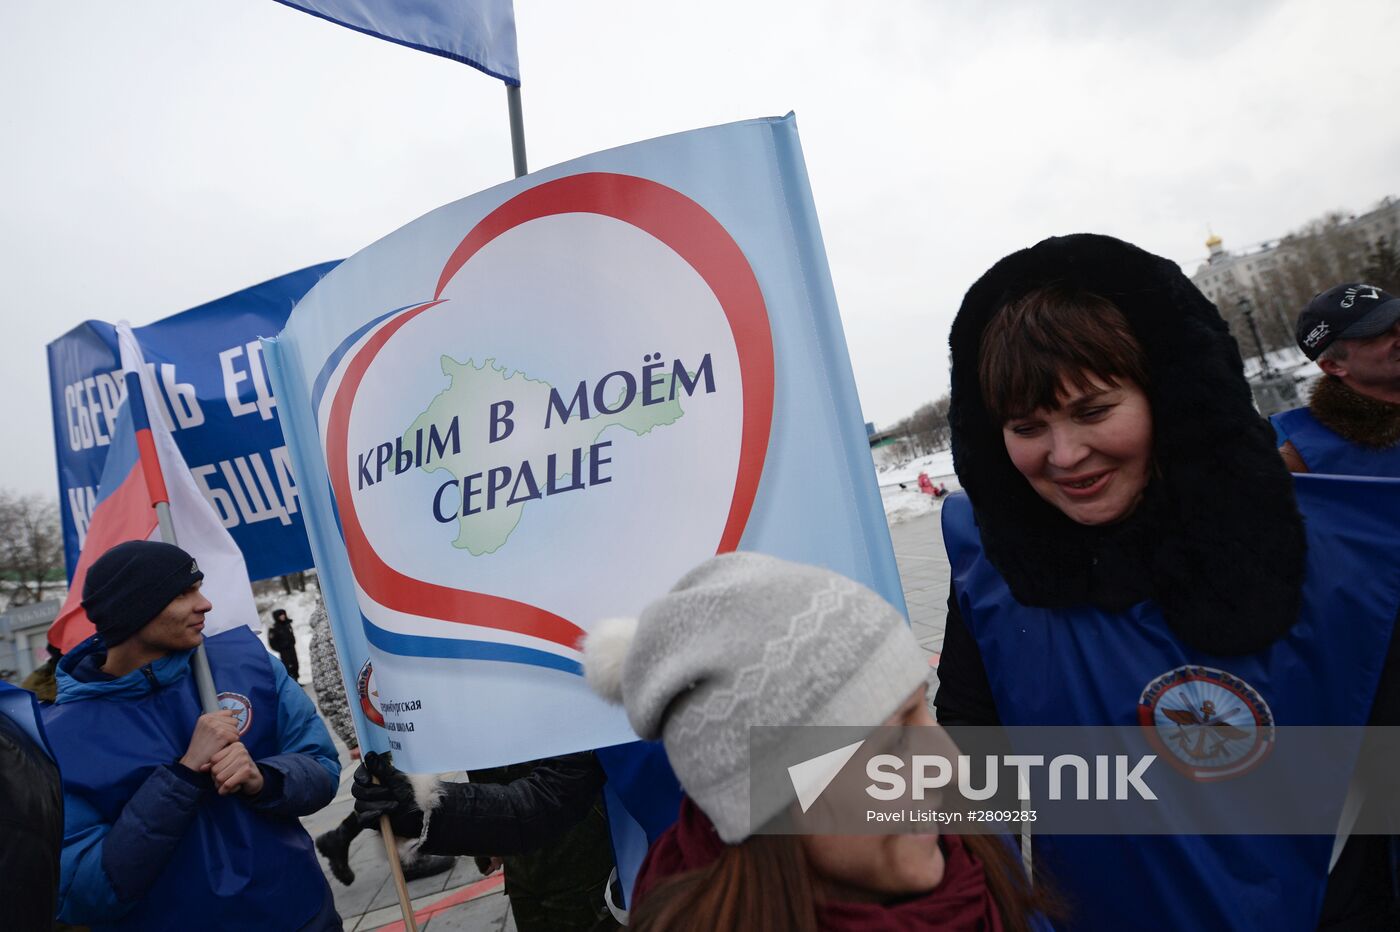 Crimea celebrates Day of Reunification with Russia